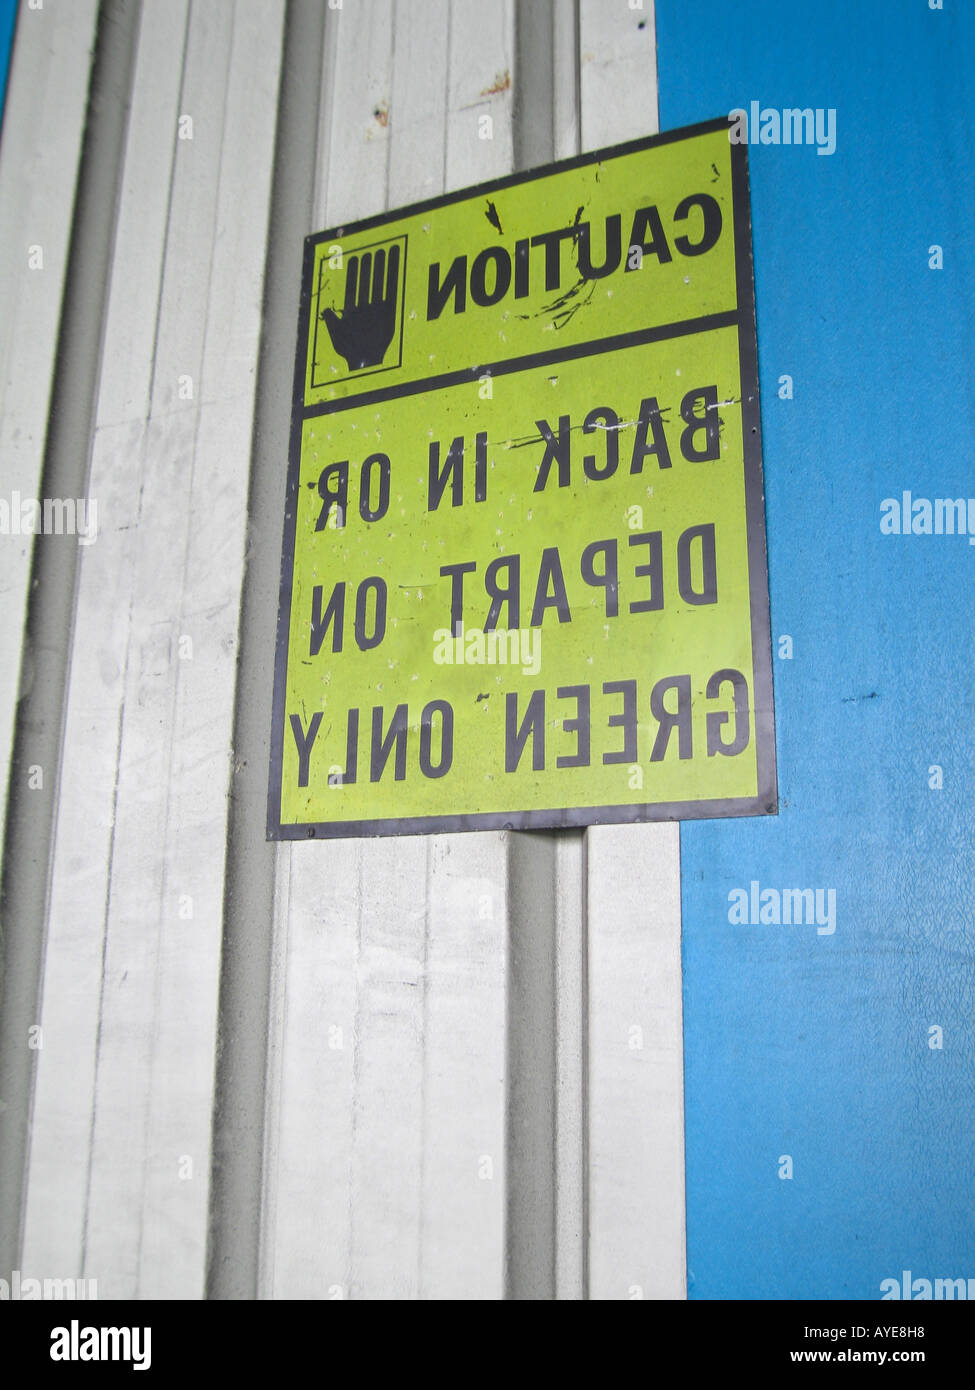 Mirror image sign on warehouse for viewing in truck rear view mirror Stock Photo